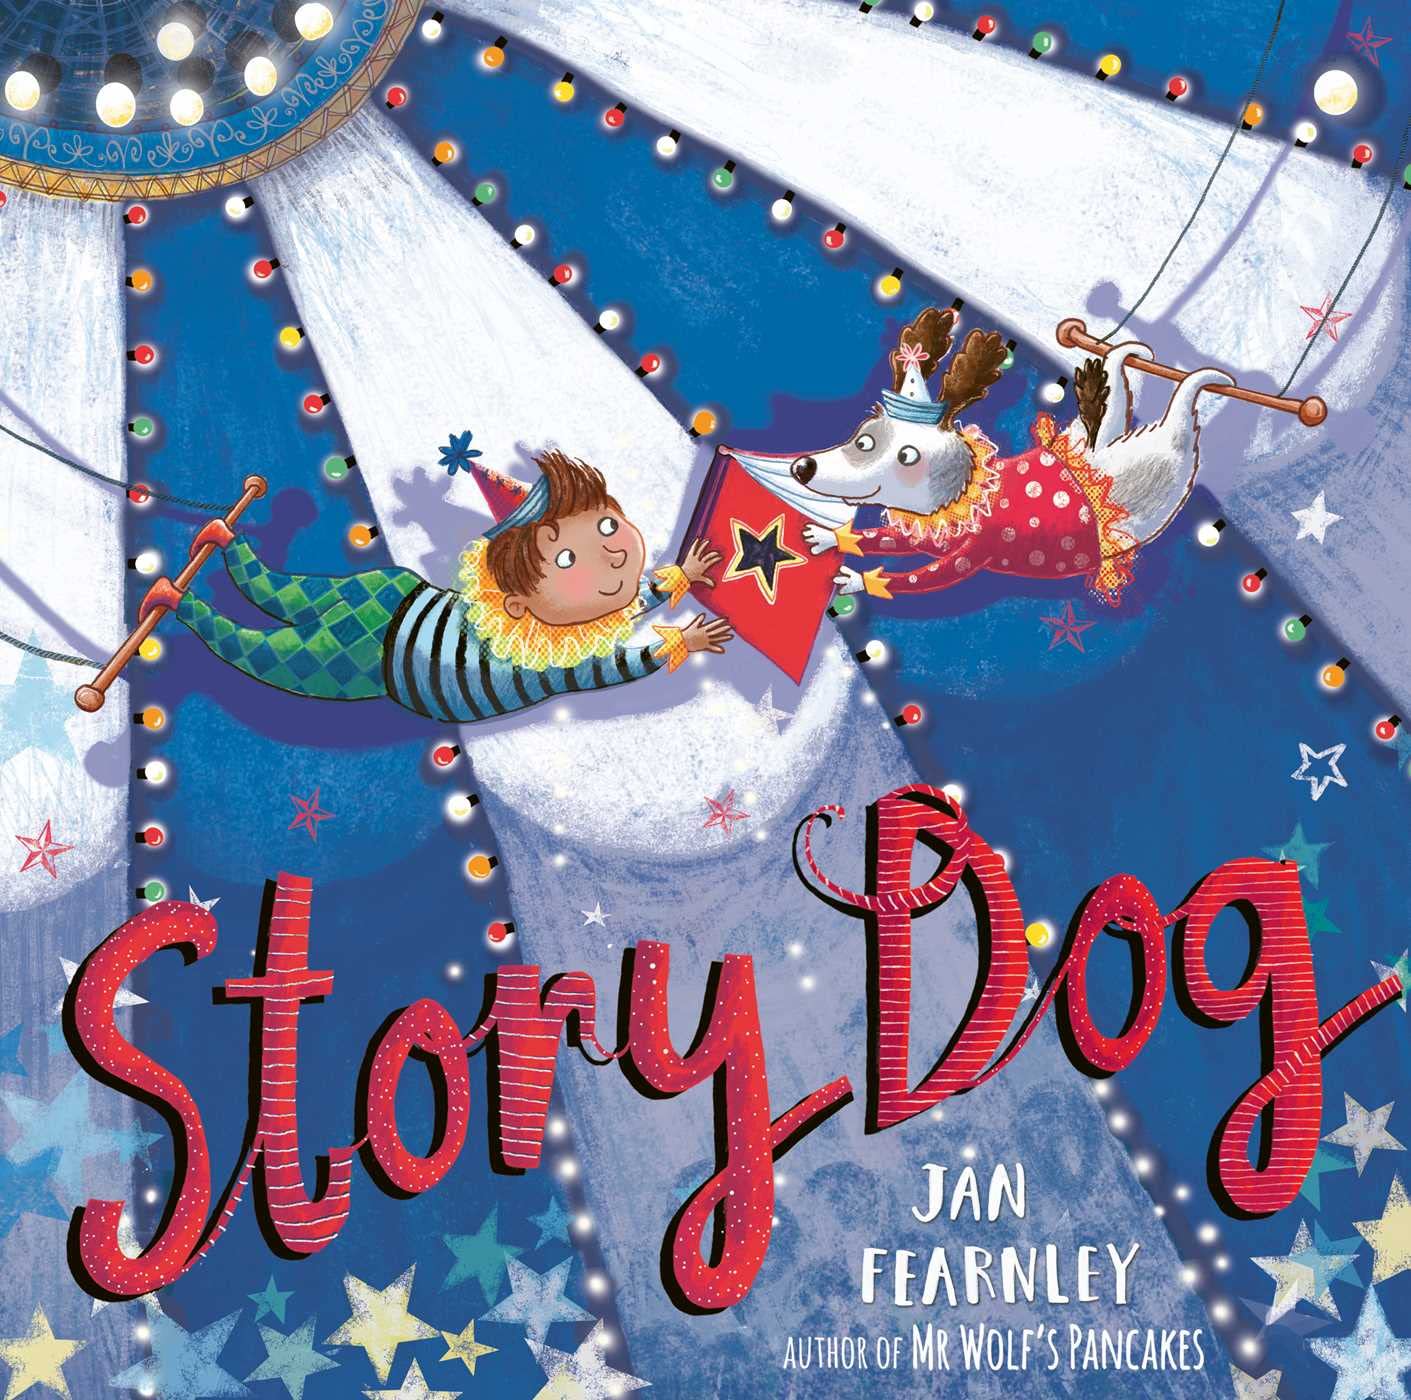 Front cover of Story Dog by Jan Fearnley